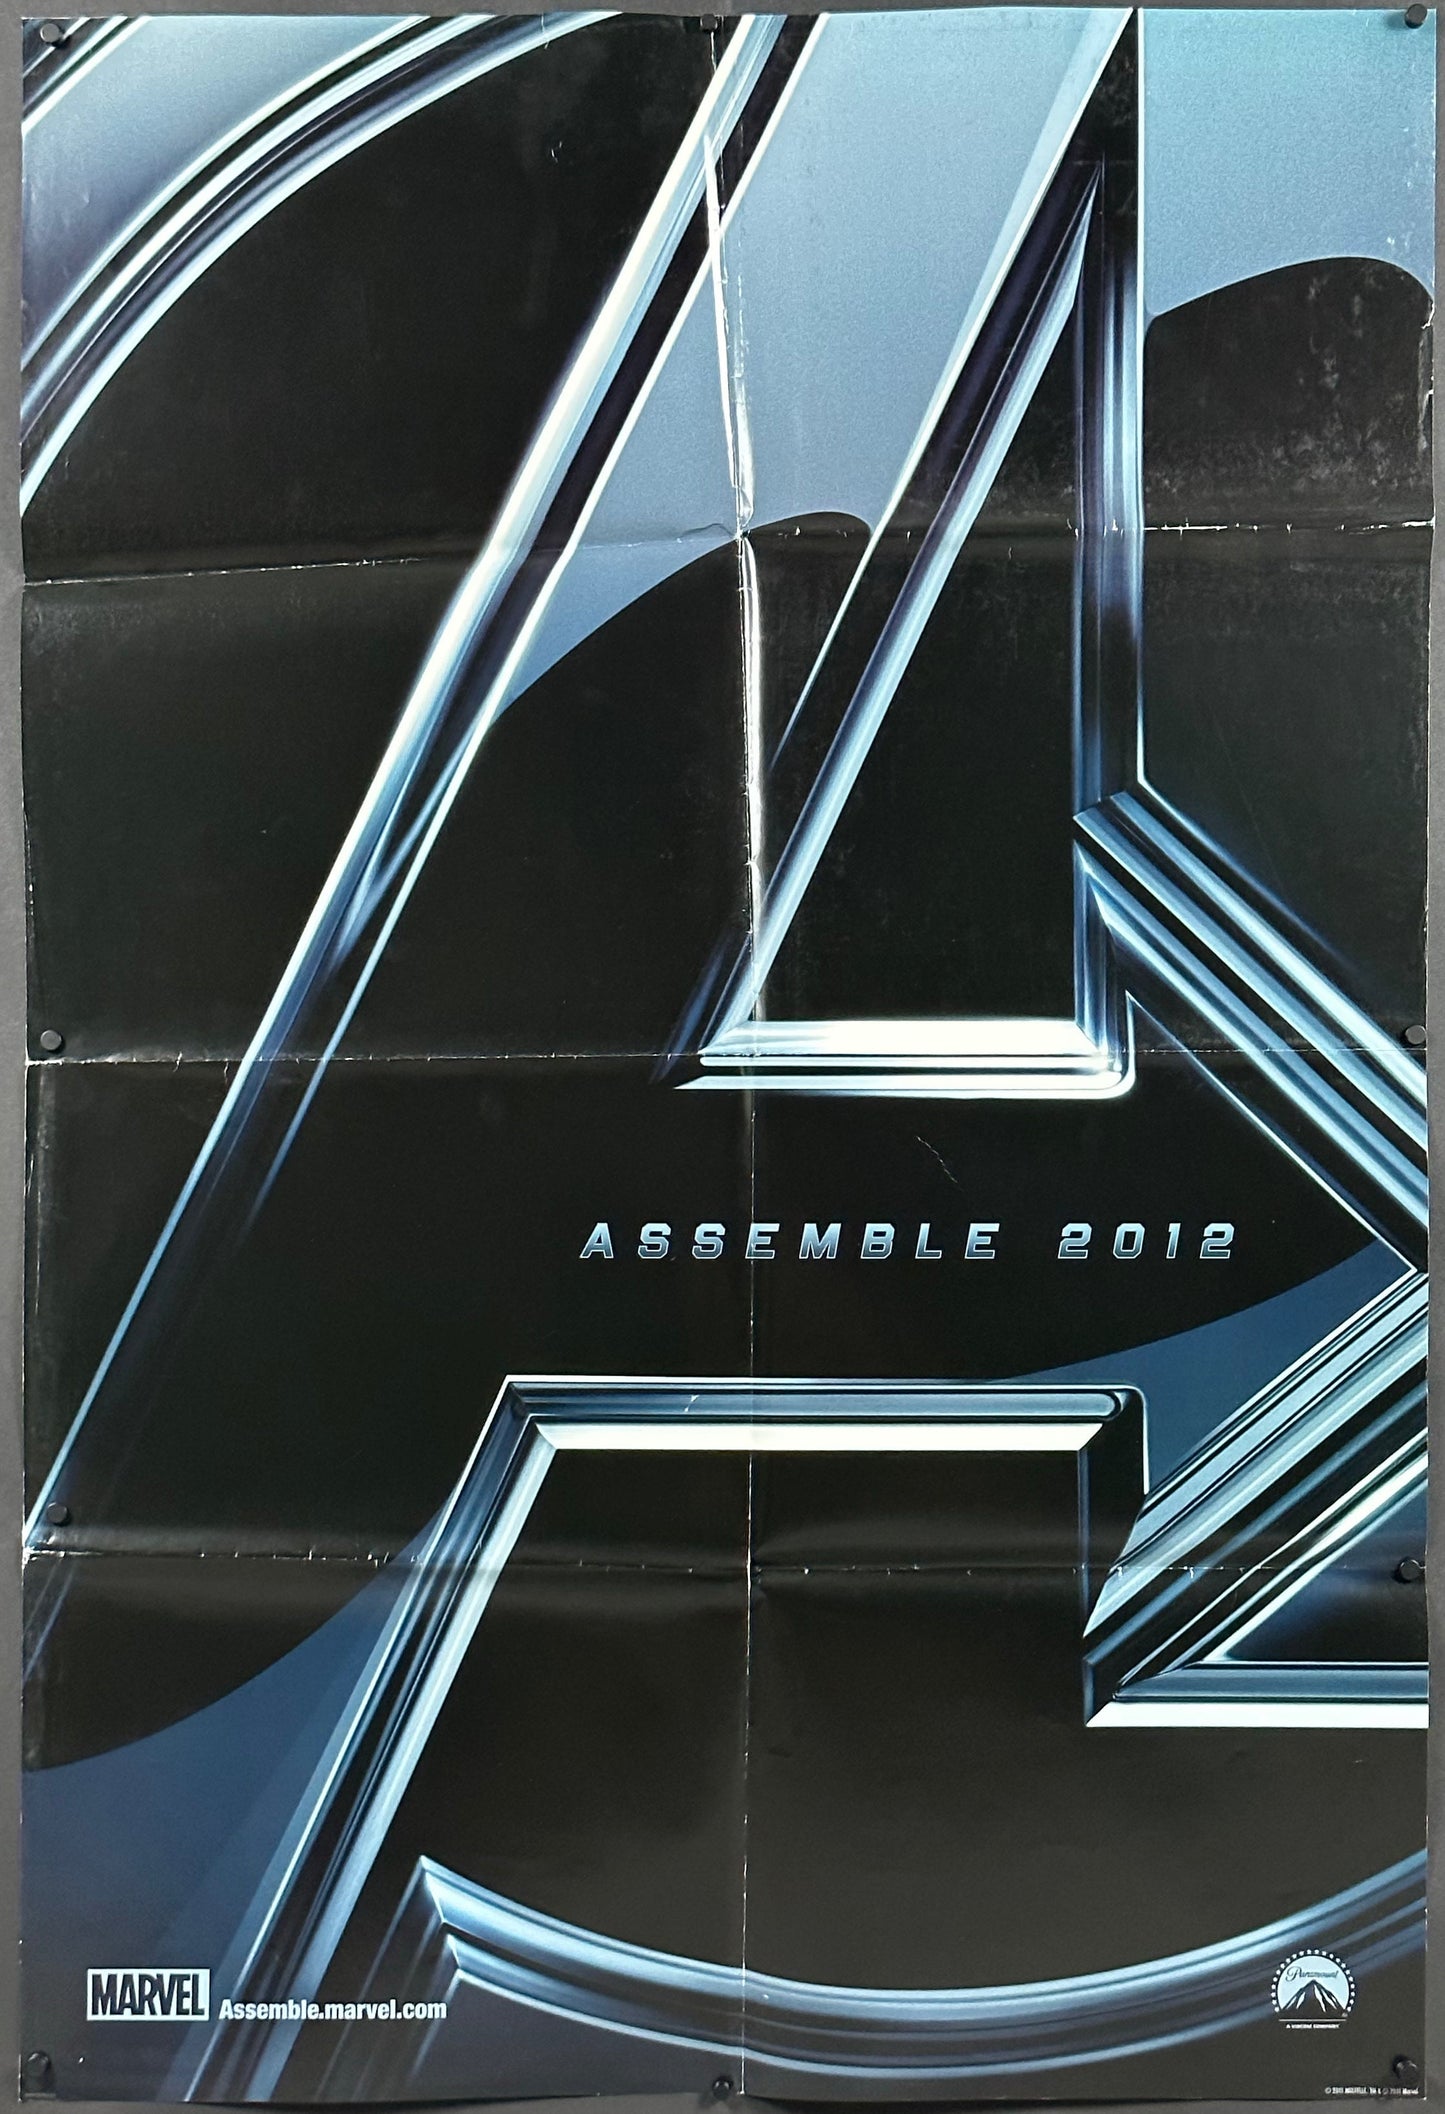 The Avengers US One Sheet Teaser Style (2012) - ORIGINAL RELEASE - posterpalace.com